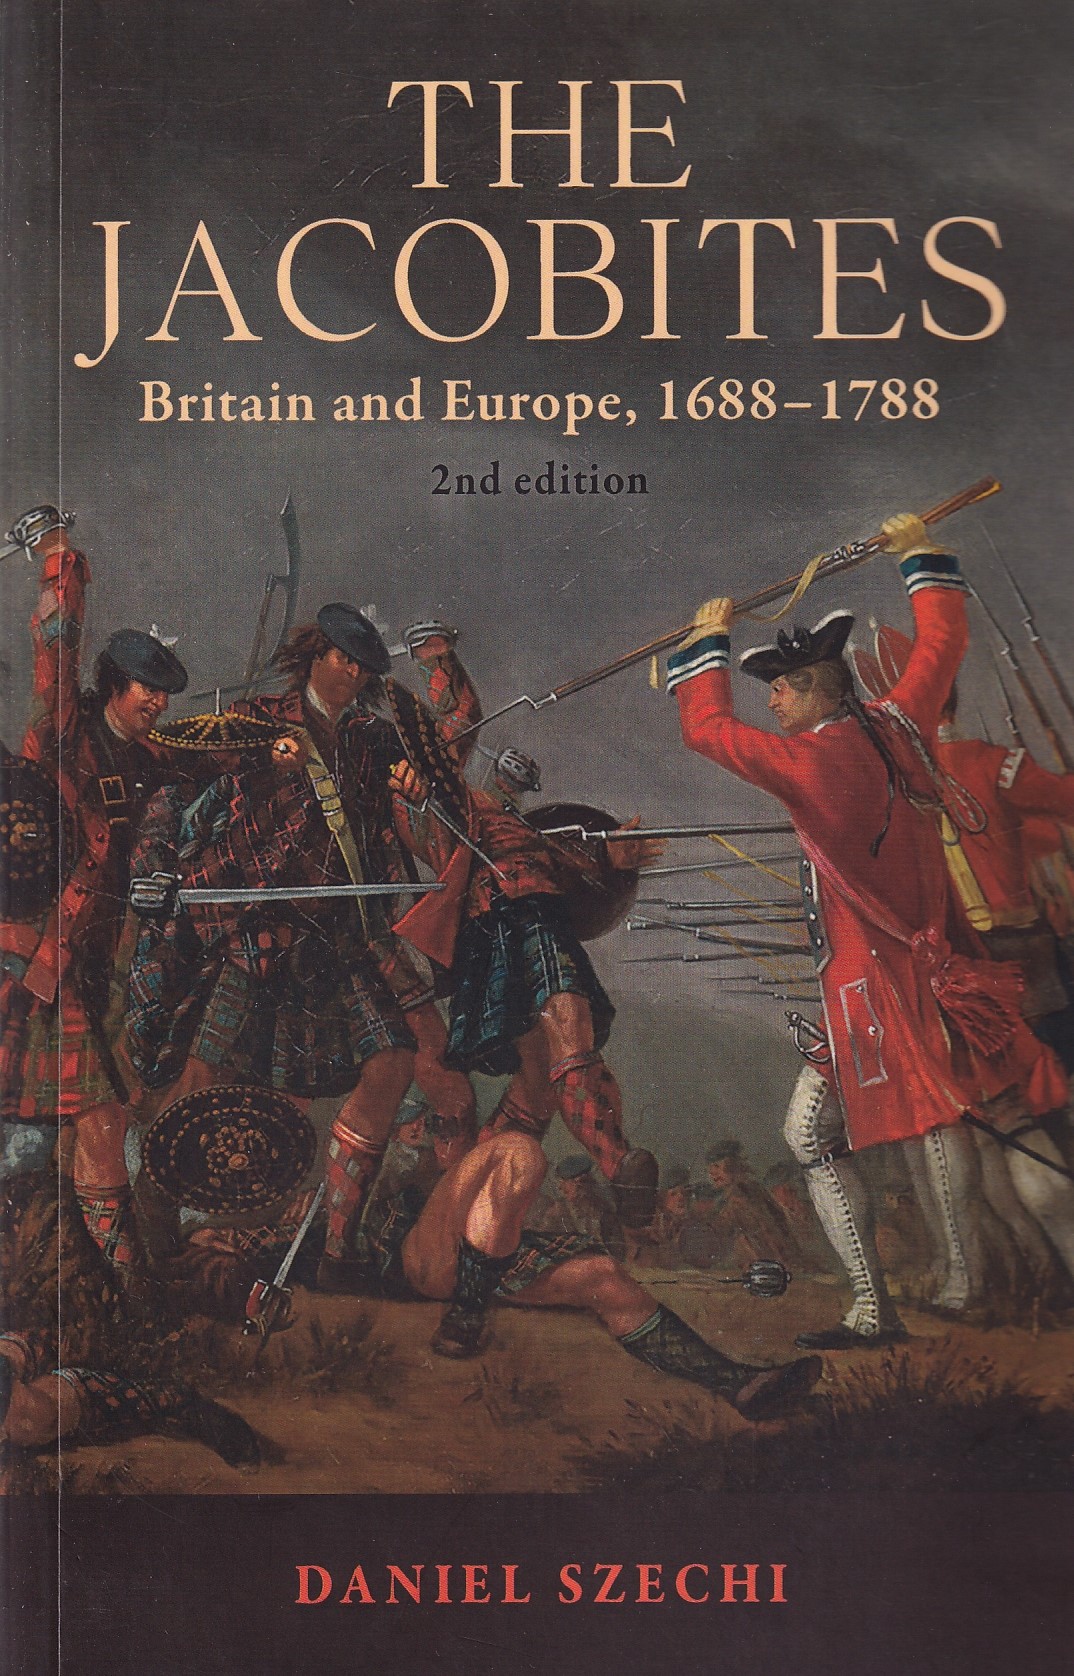 The Jacobites: Britain and Europe, 1688-1788 by Daniel Szechi